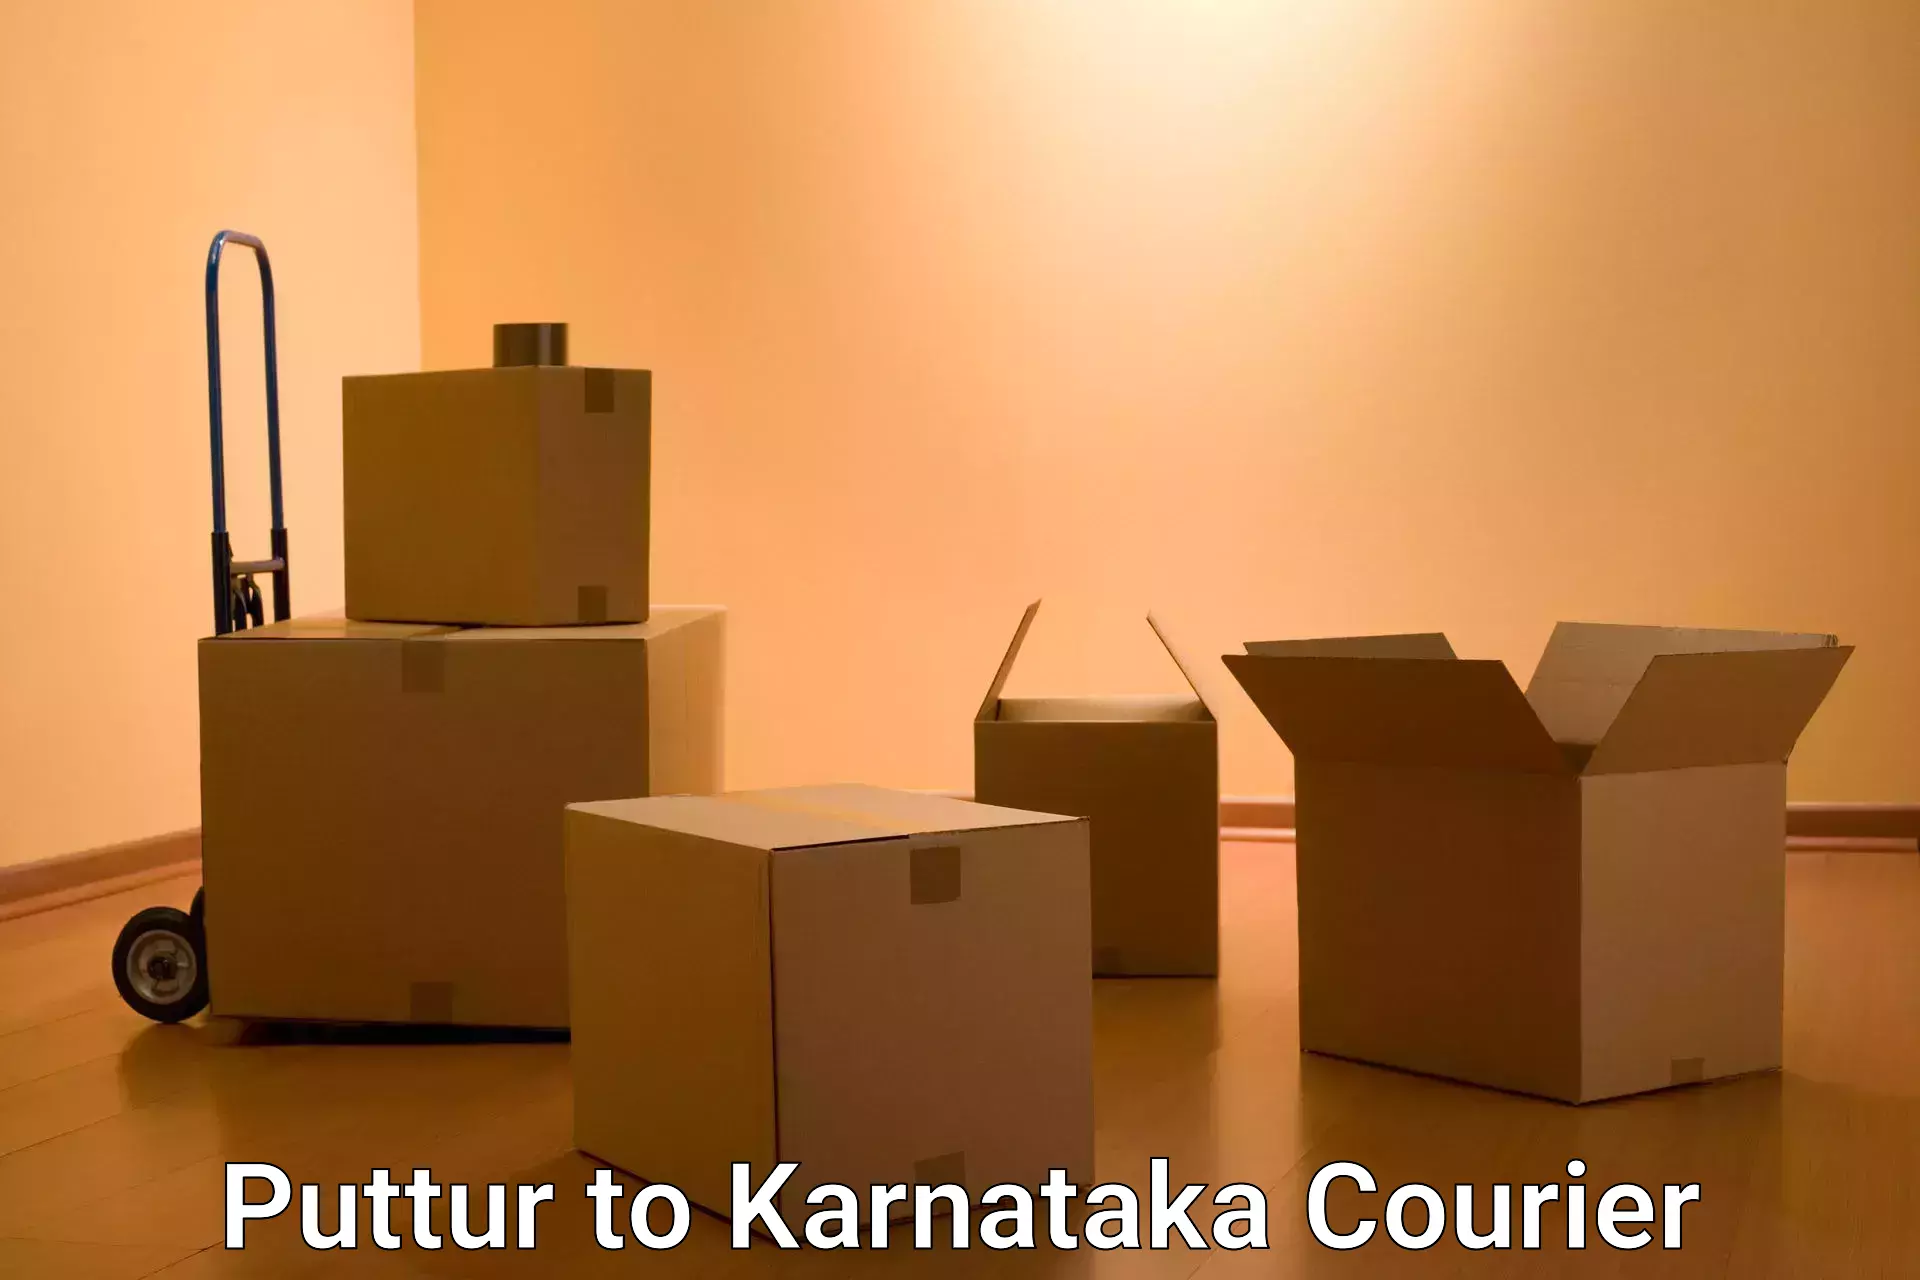 Nationwide shipping capabilities Puttur to Bangalore